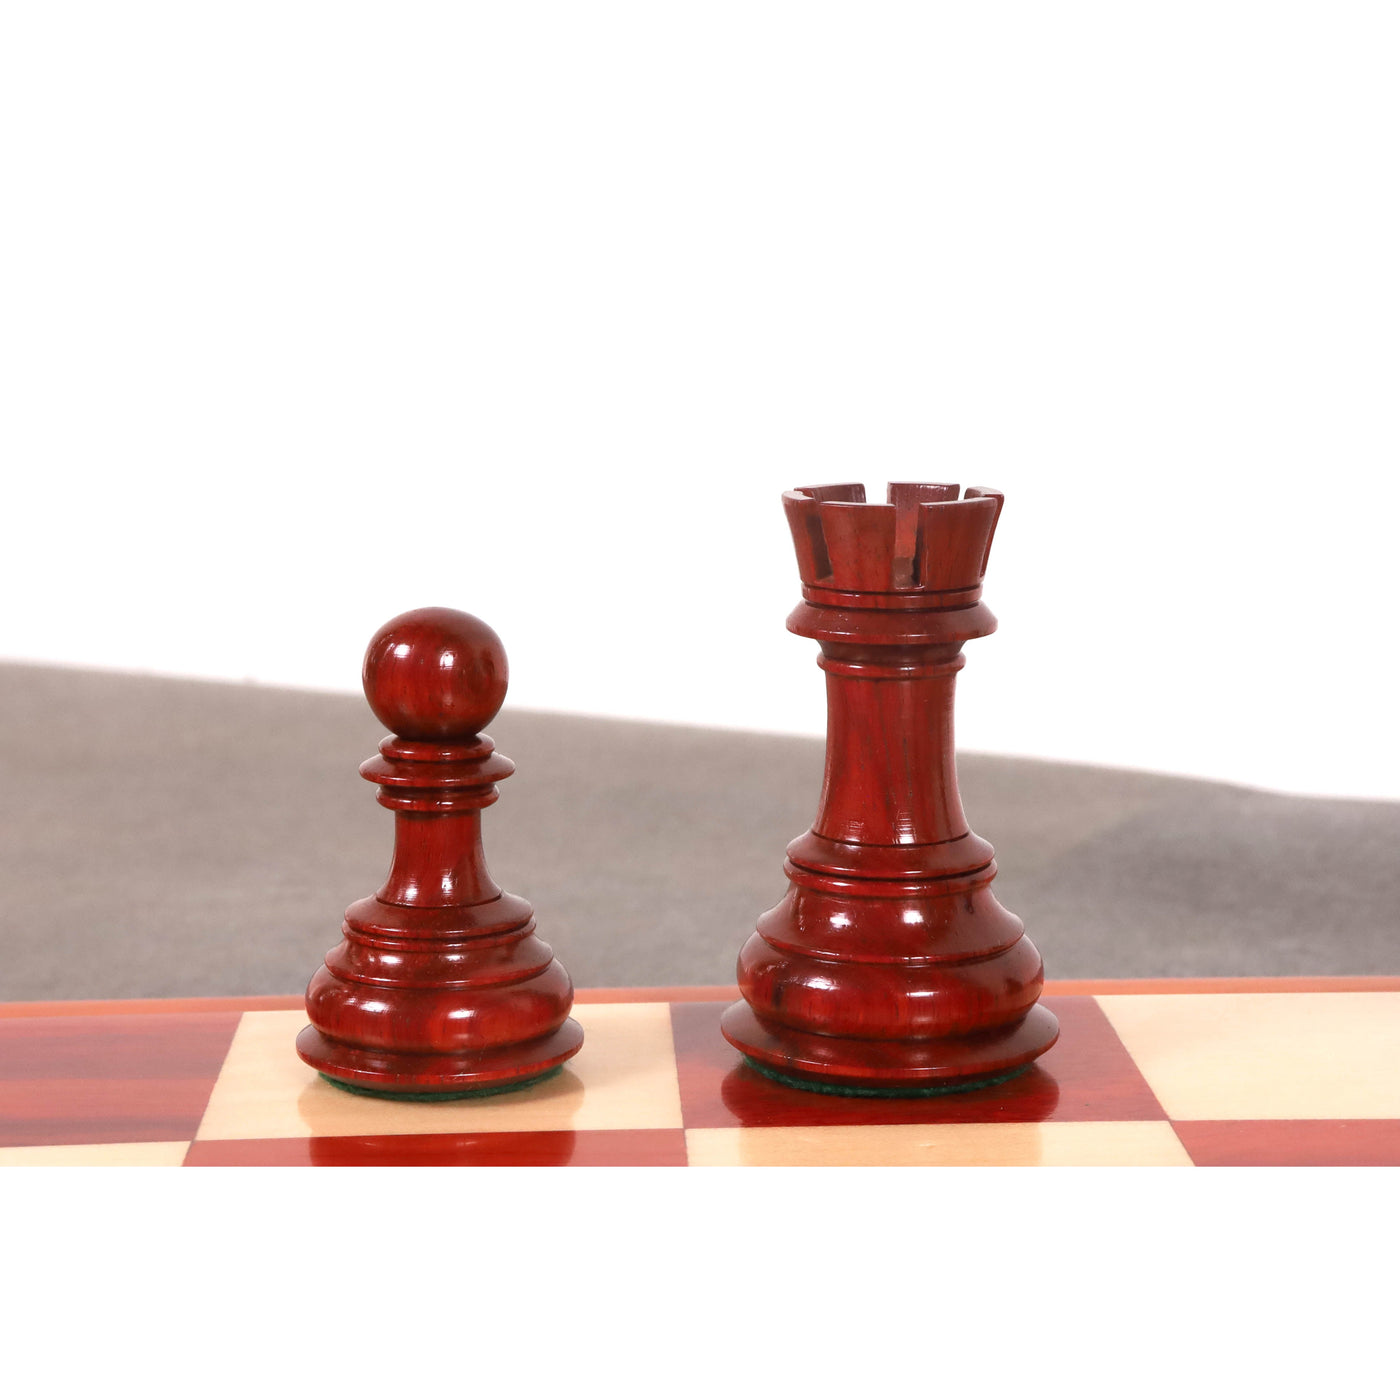 4.6" Rare Columbian Triple Weighted Bud Rosewood Luxury Chess Pieces with 23" Bud Rosewood & Maple Wood Signature Wooden Chessboard and Leatherette Coffer Storage Box